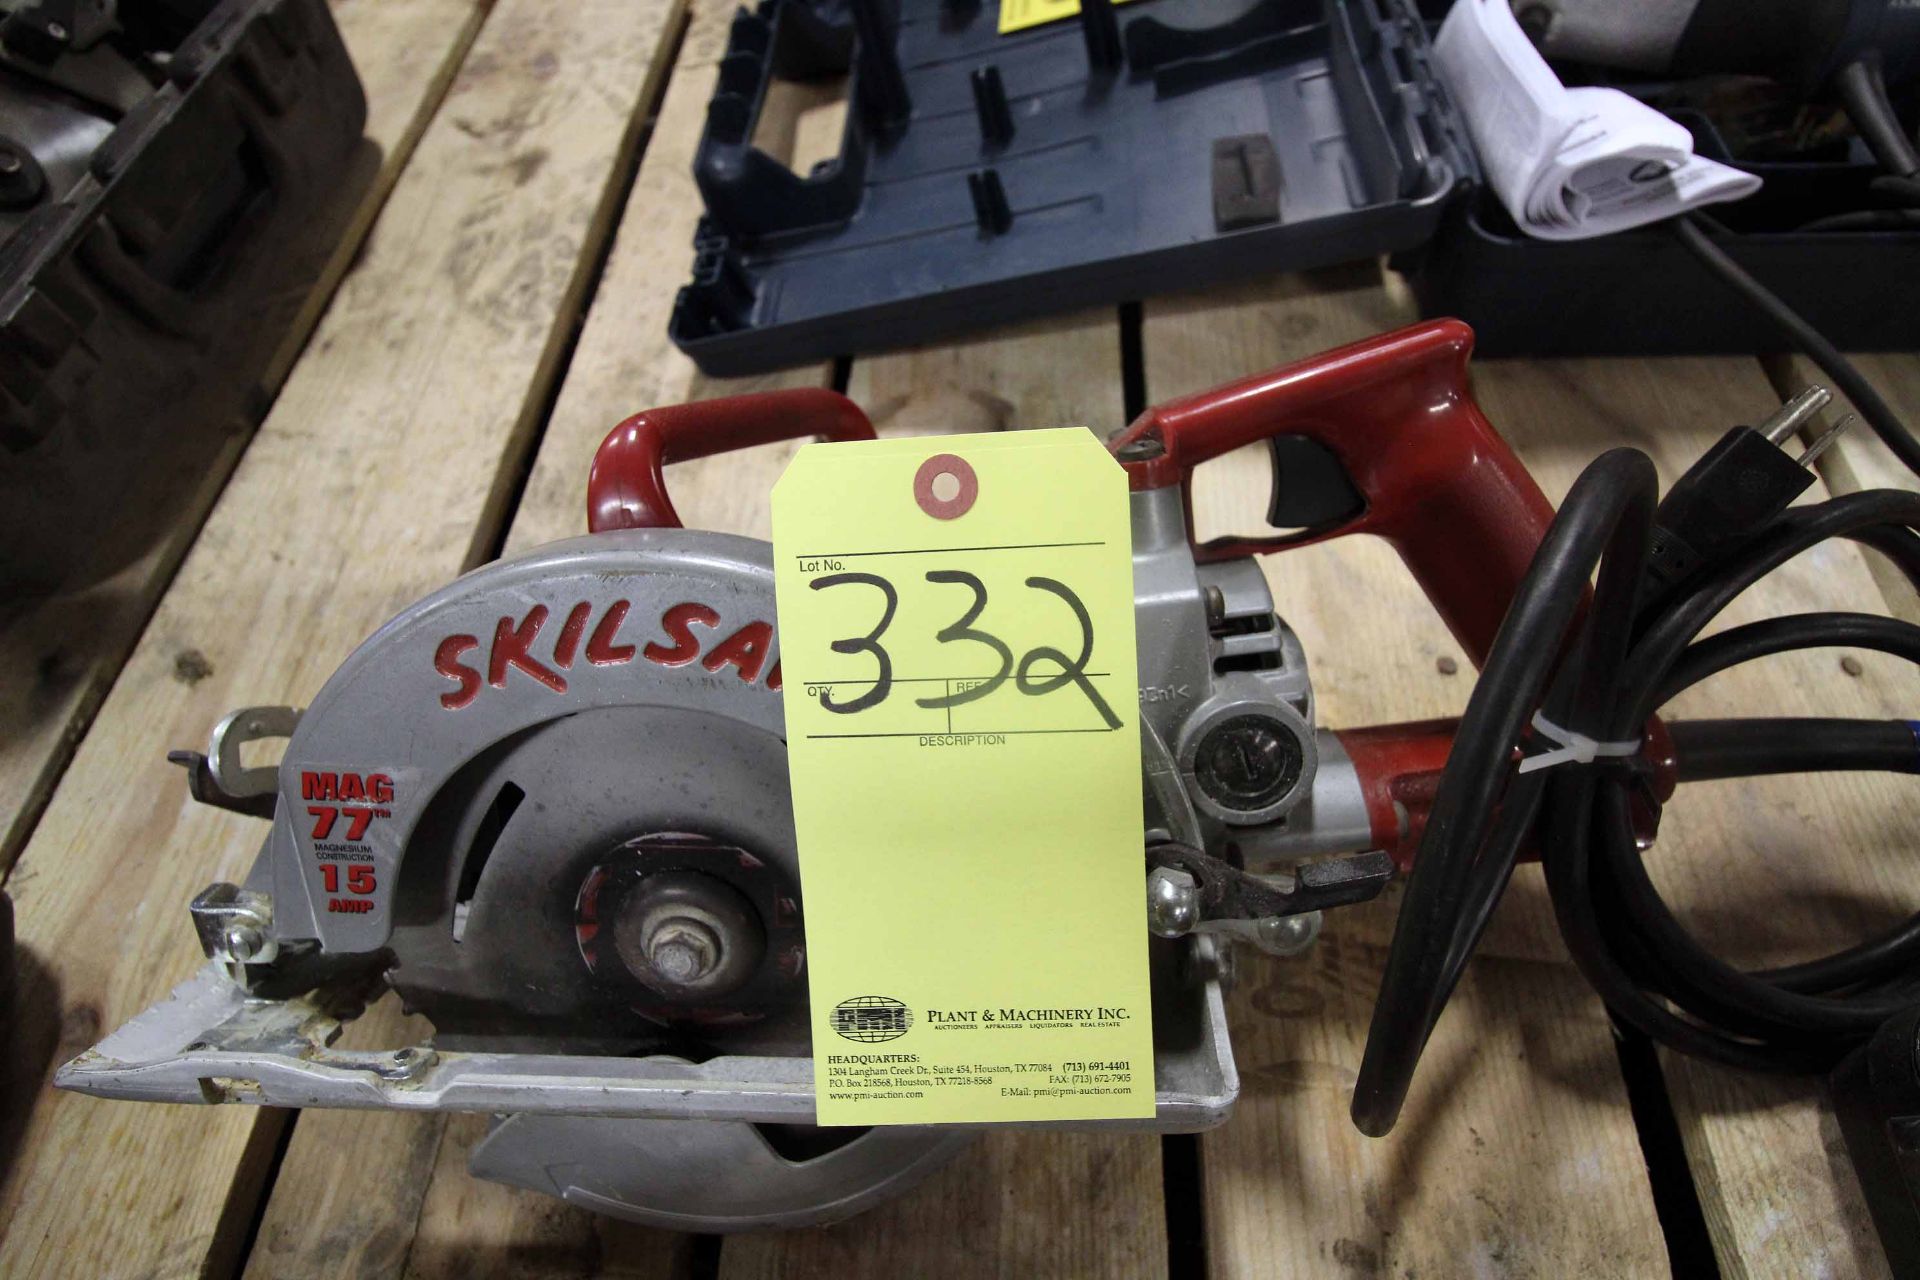 LOT OF HAND SAWS (2): (1) Skill Saw Mdl. SHD77M, 7-1/4", (1) Milwaukee Mdl. 6365, 7-1/4" - Image 2 of 3